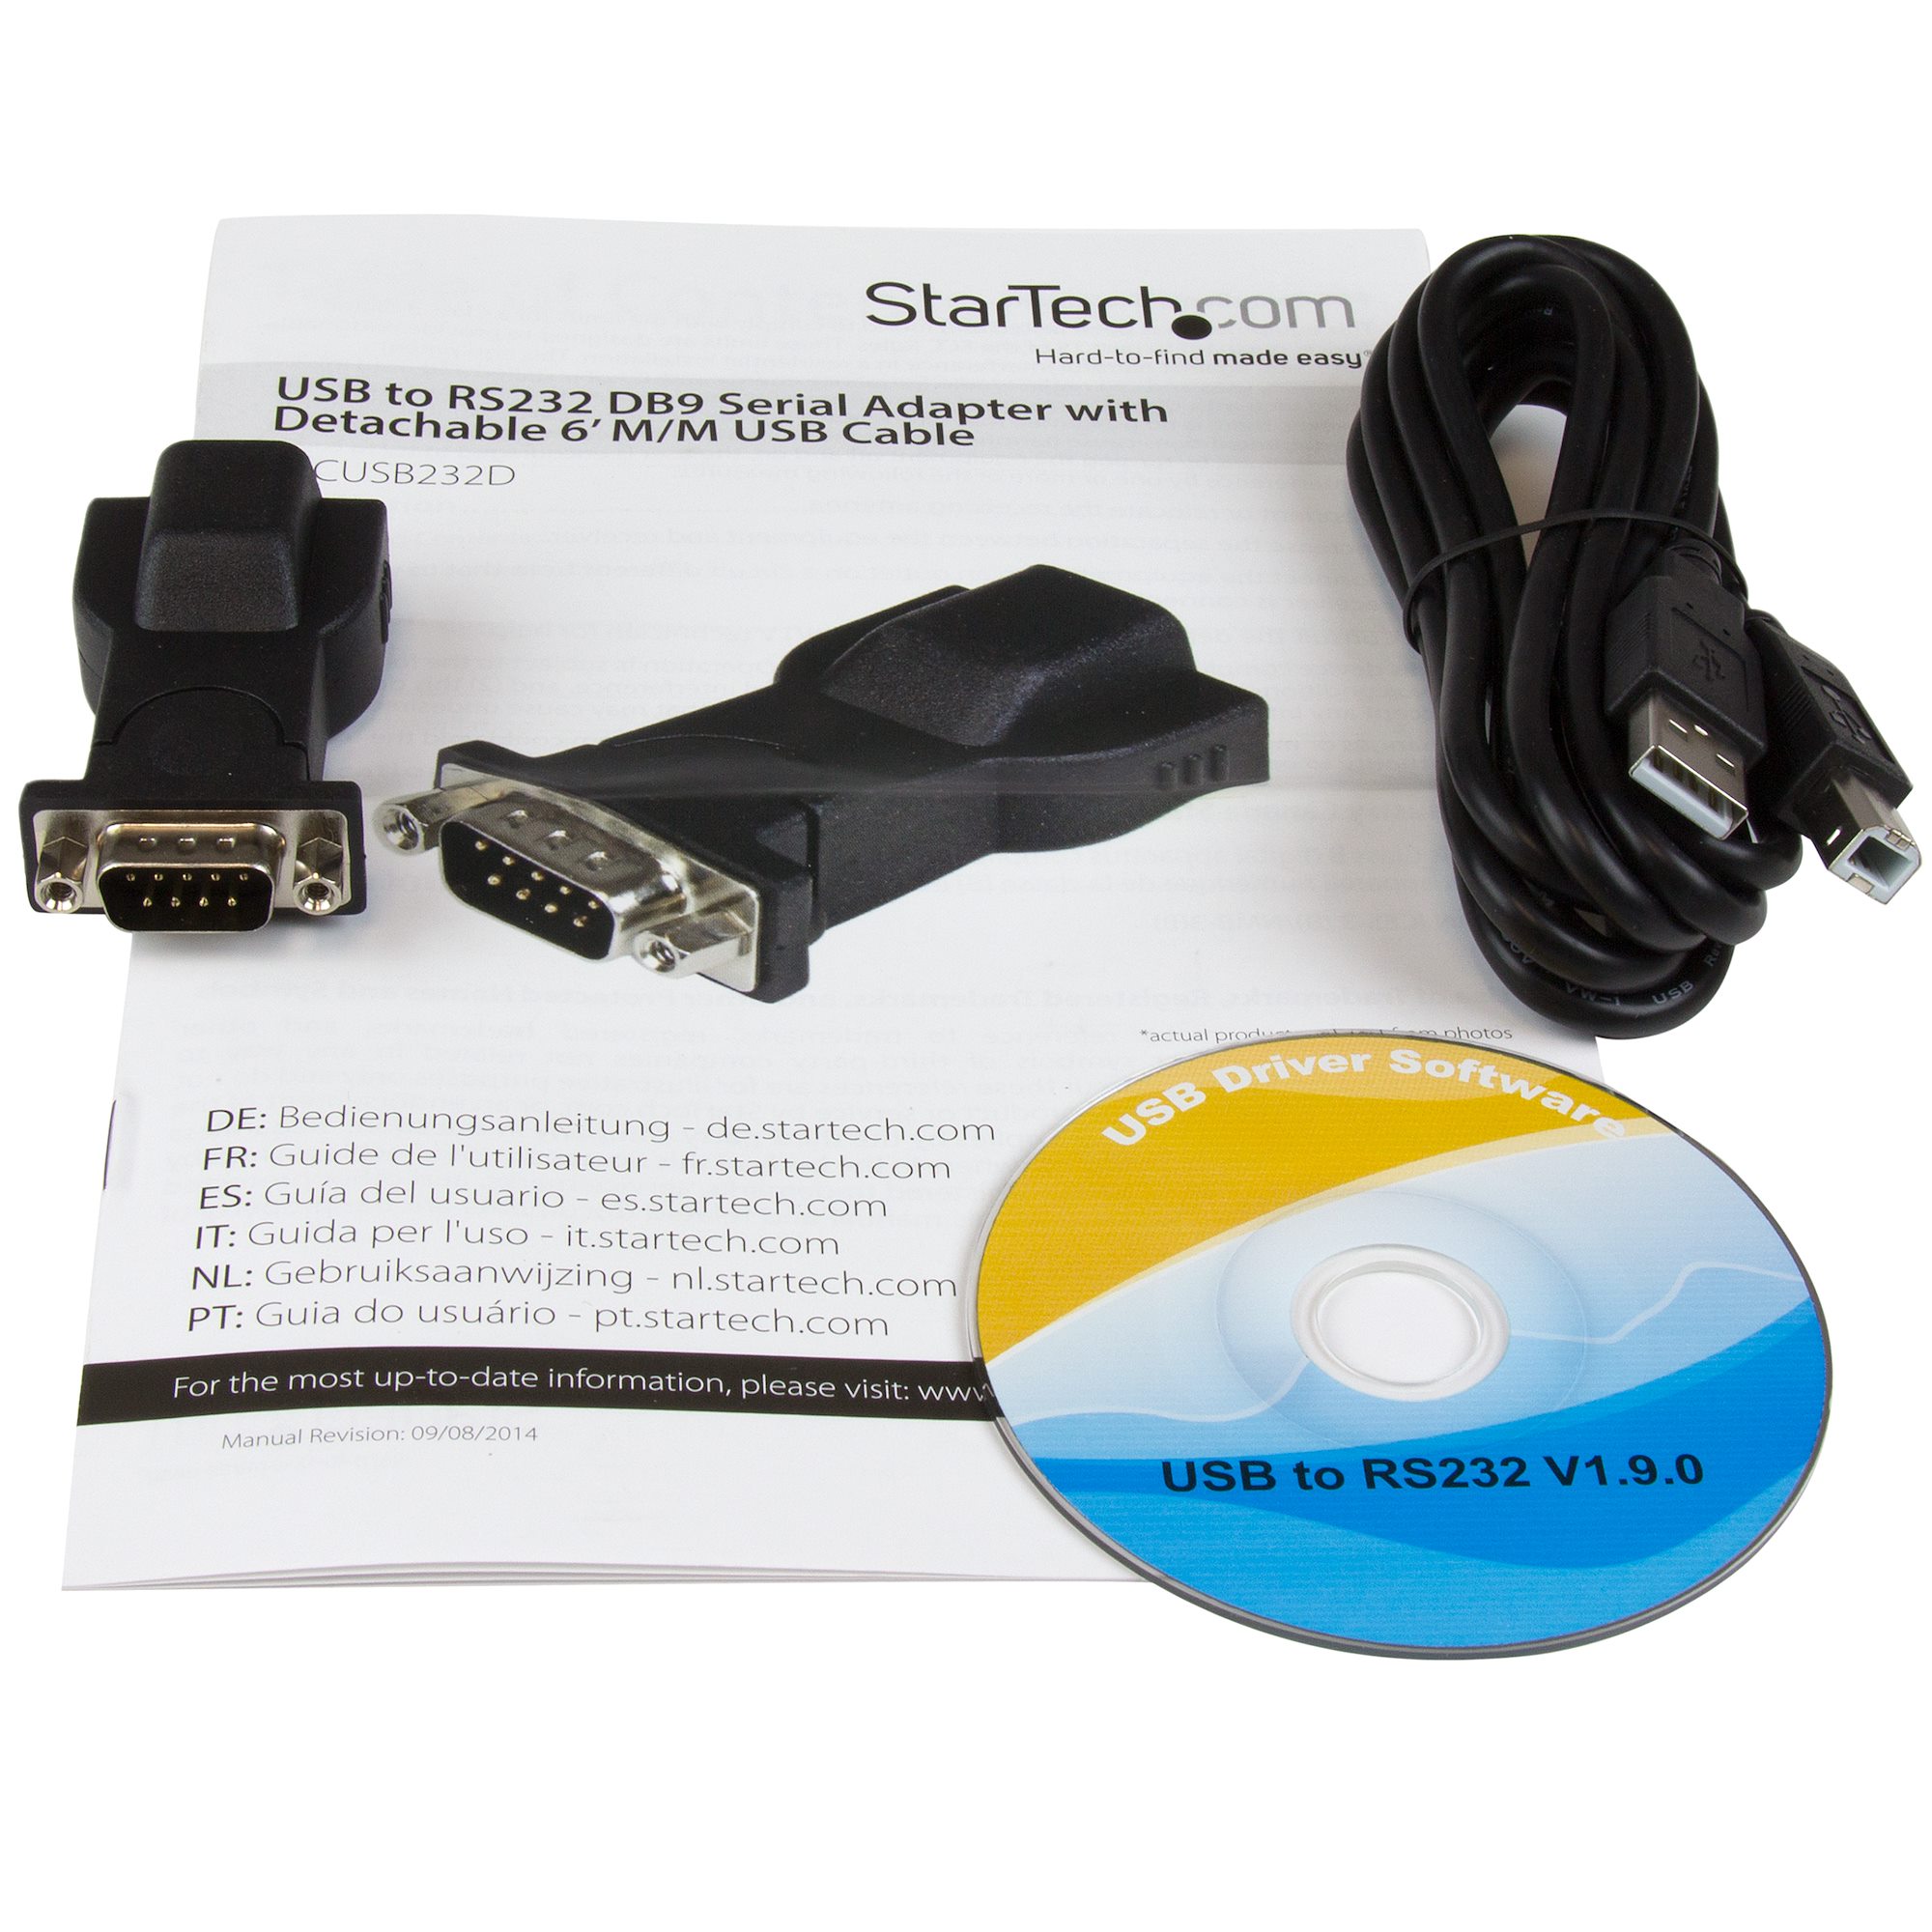 USB to Serial Adapter w/ Detachable USB - Serial Cards & Adapters |